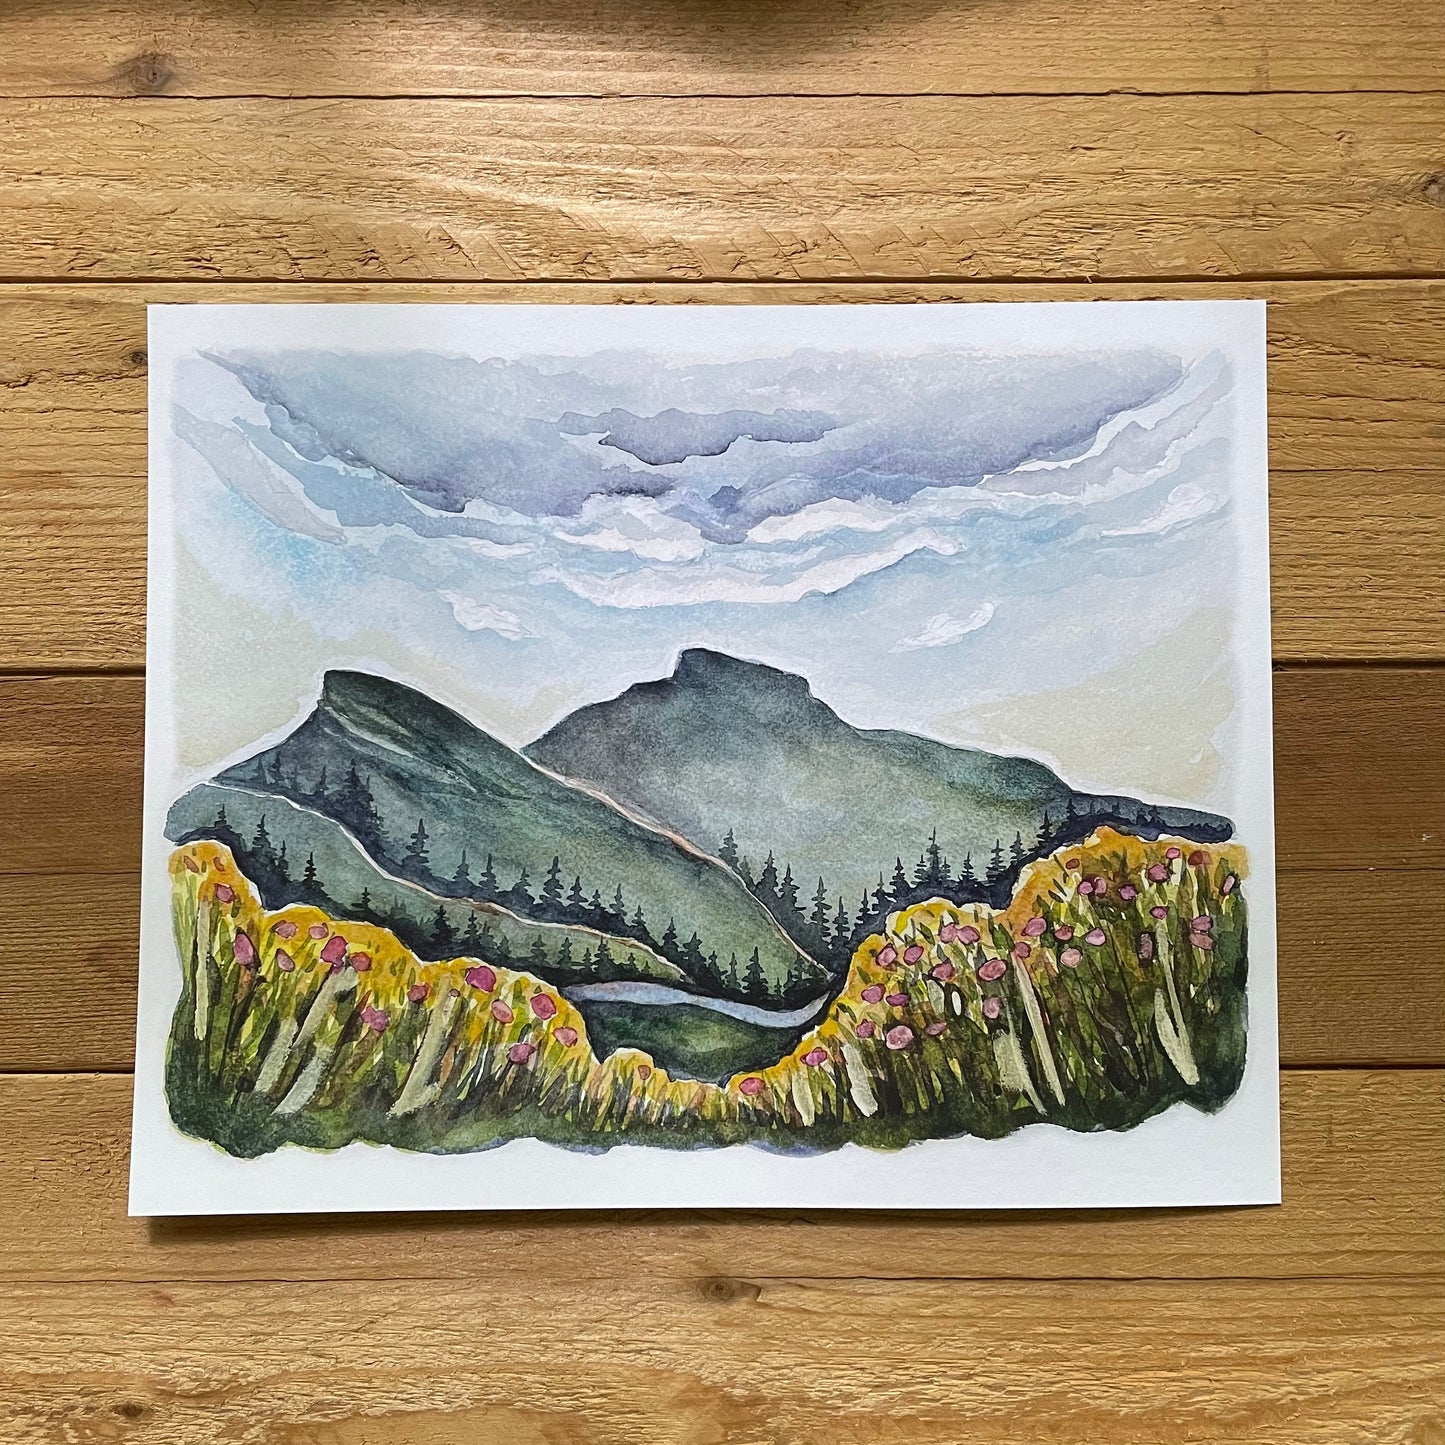 Linville Gorge in Spring PRINTS 5x7, 8x10, 11x14"